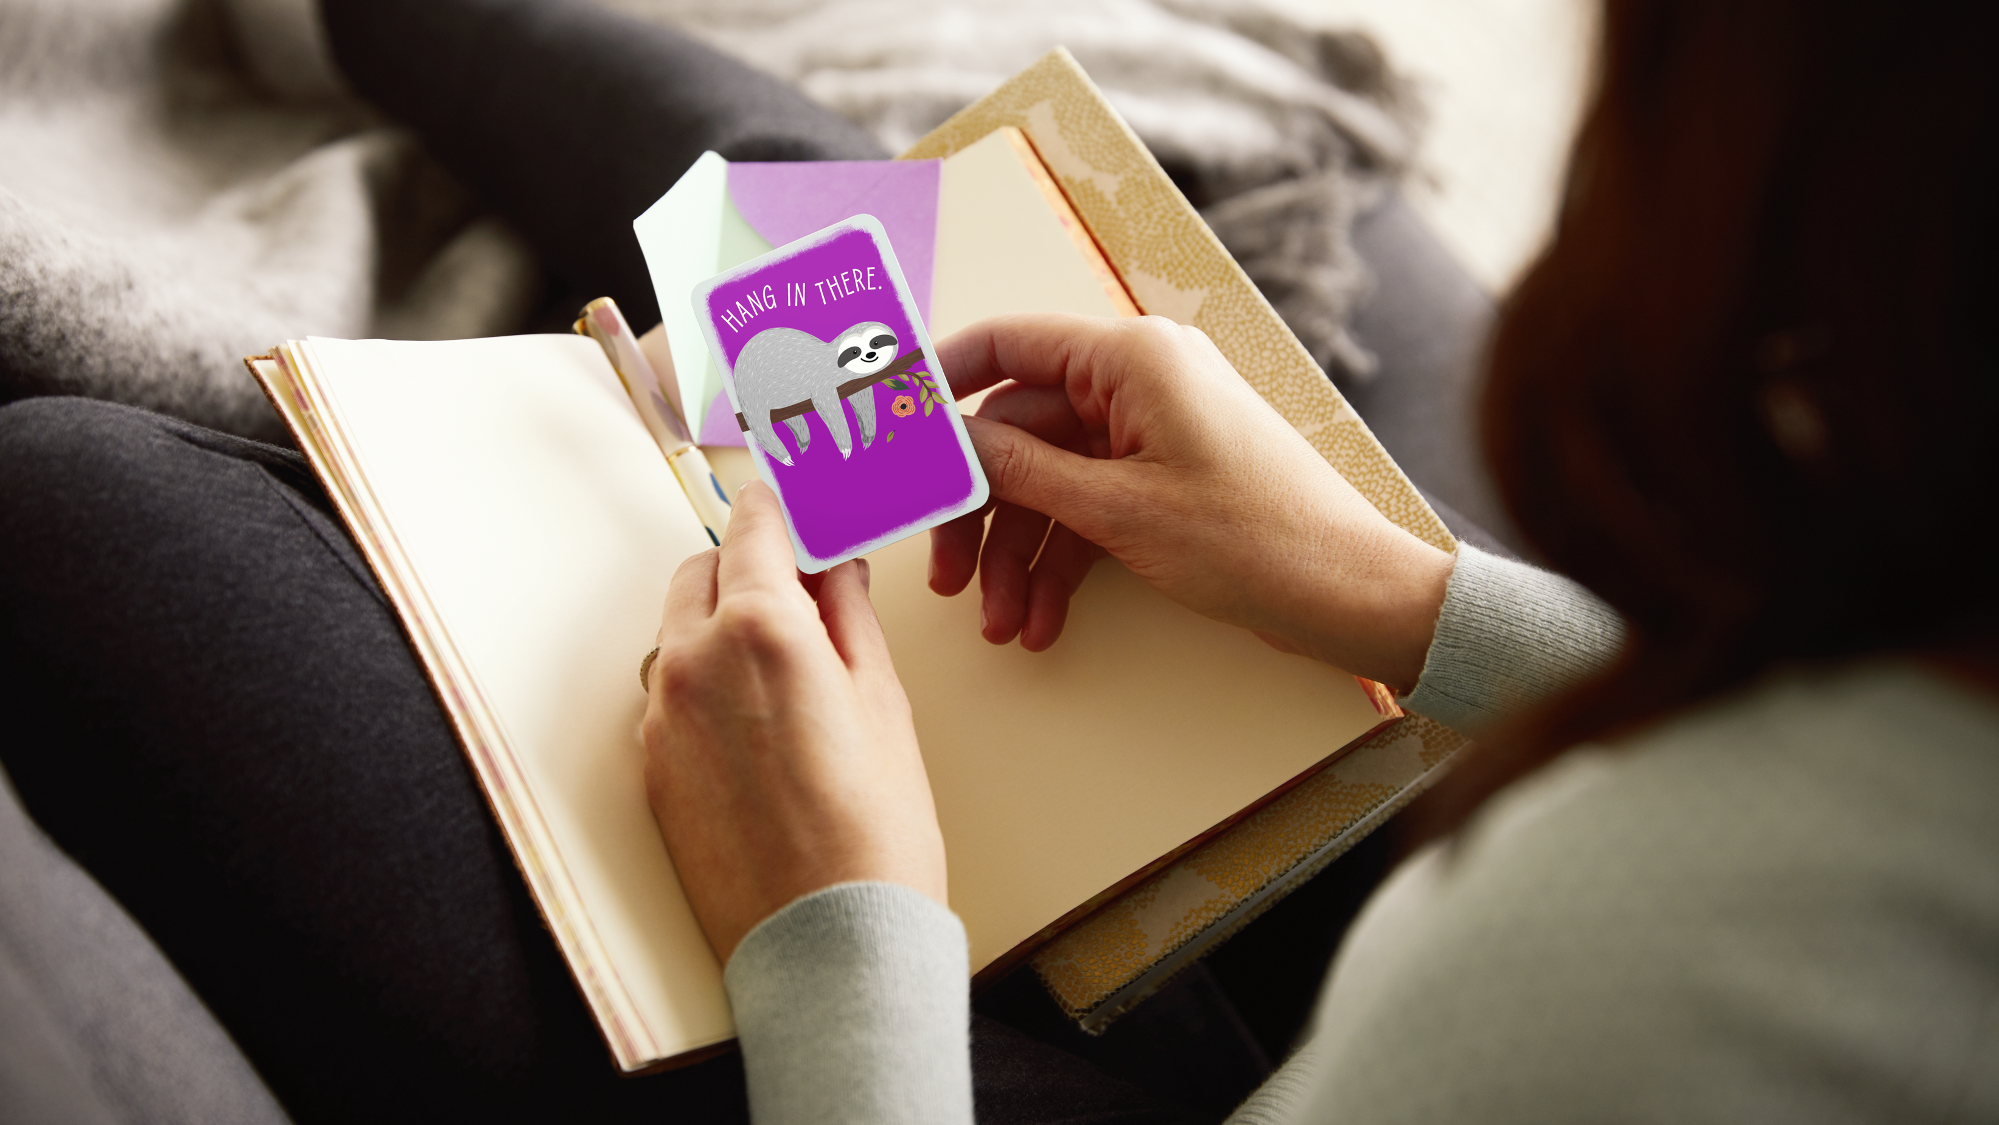 Person holding Hang In There card over open book